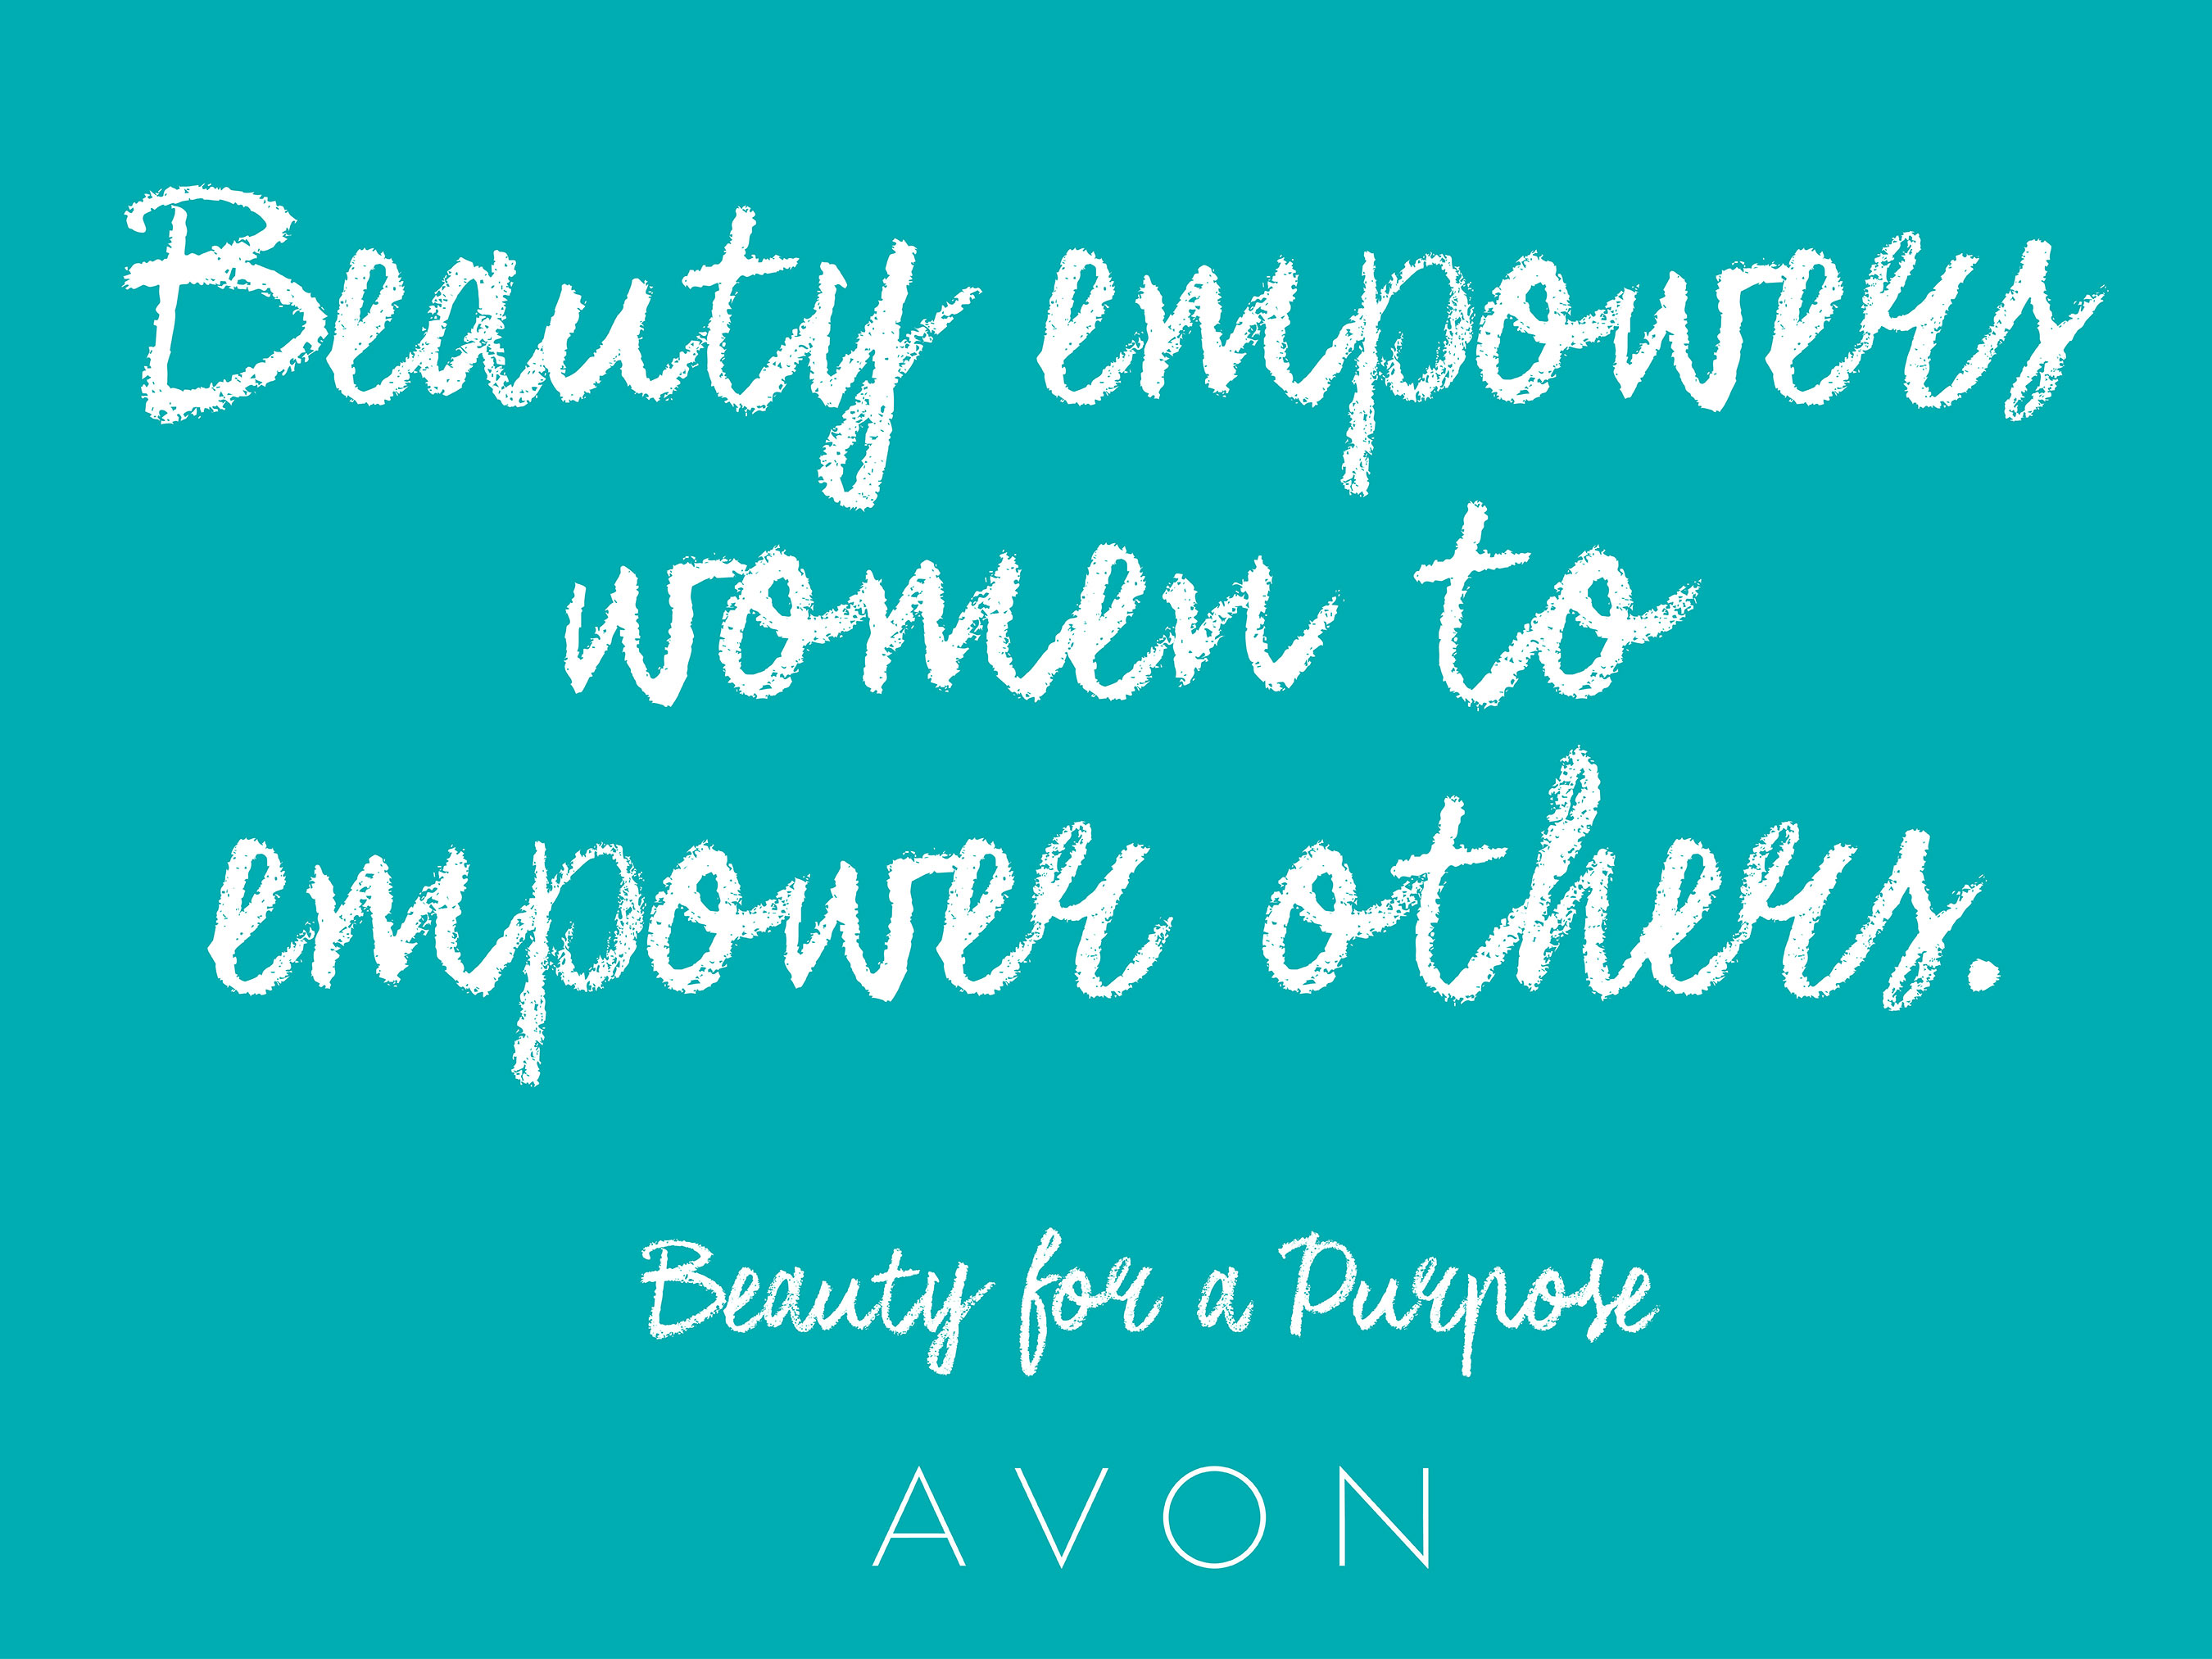 Avon Announces Beauty for a Purpose New Brand Statement Reflecting  Commitment to Empowering Women